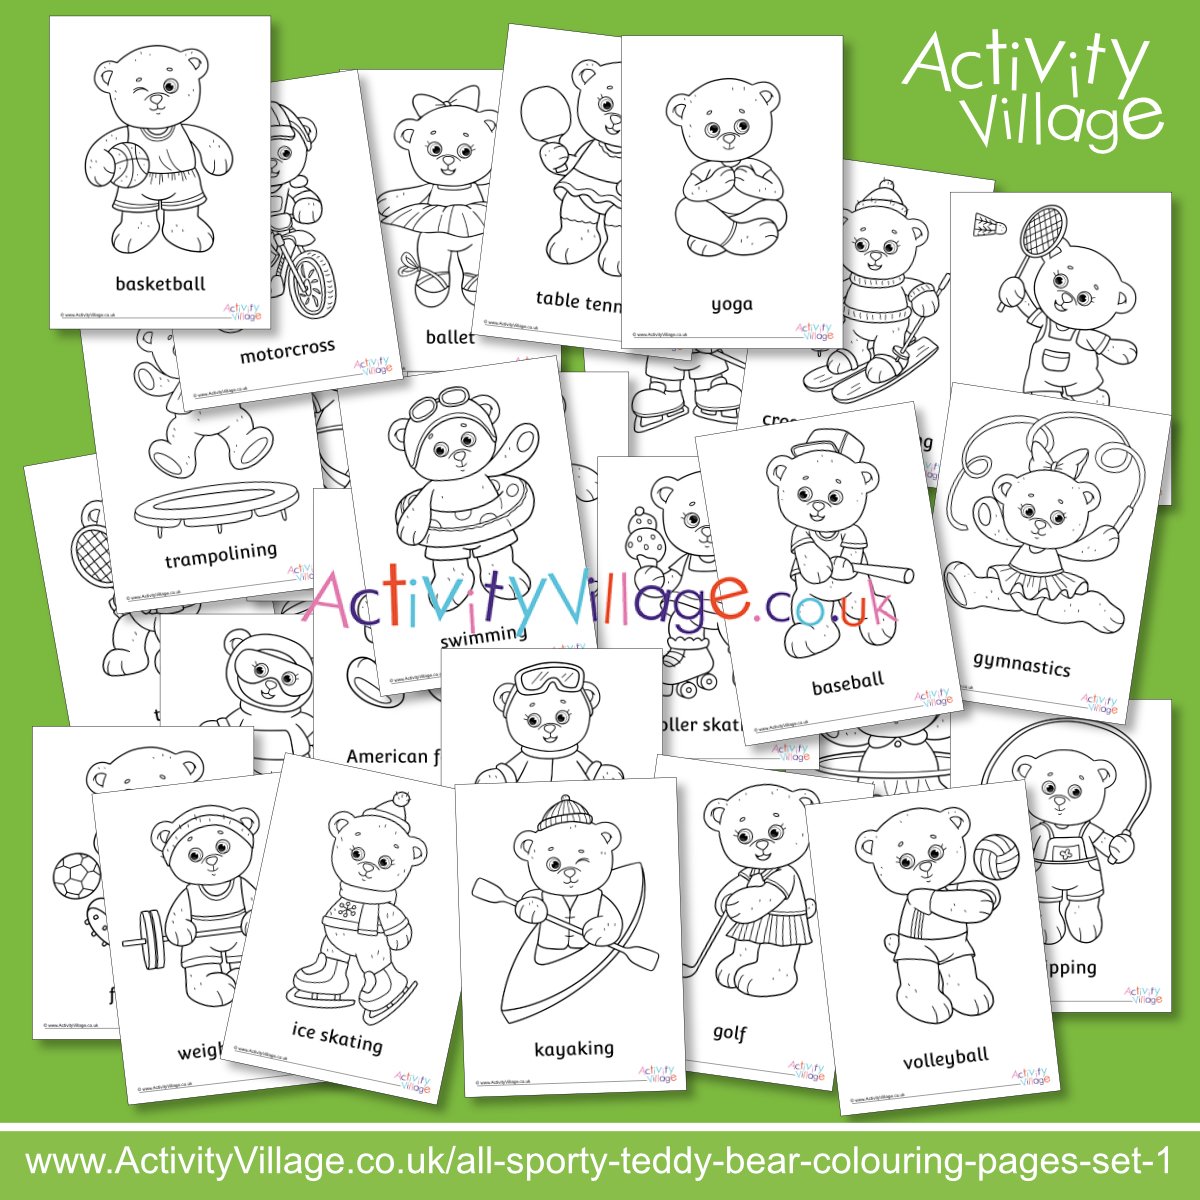 Sporty teddy bear colouring pages set 1